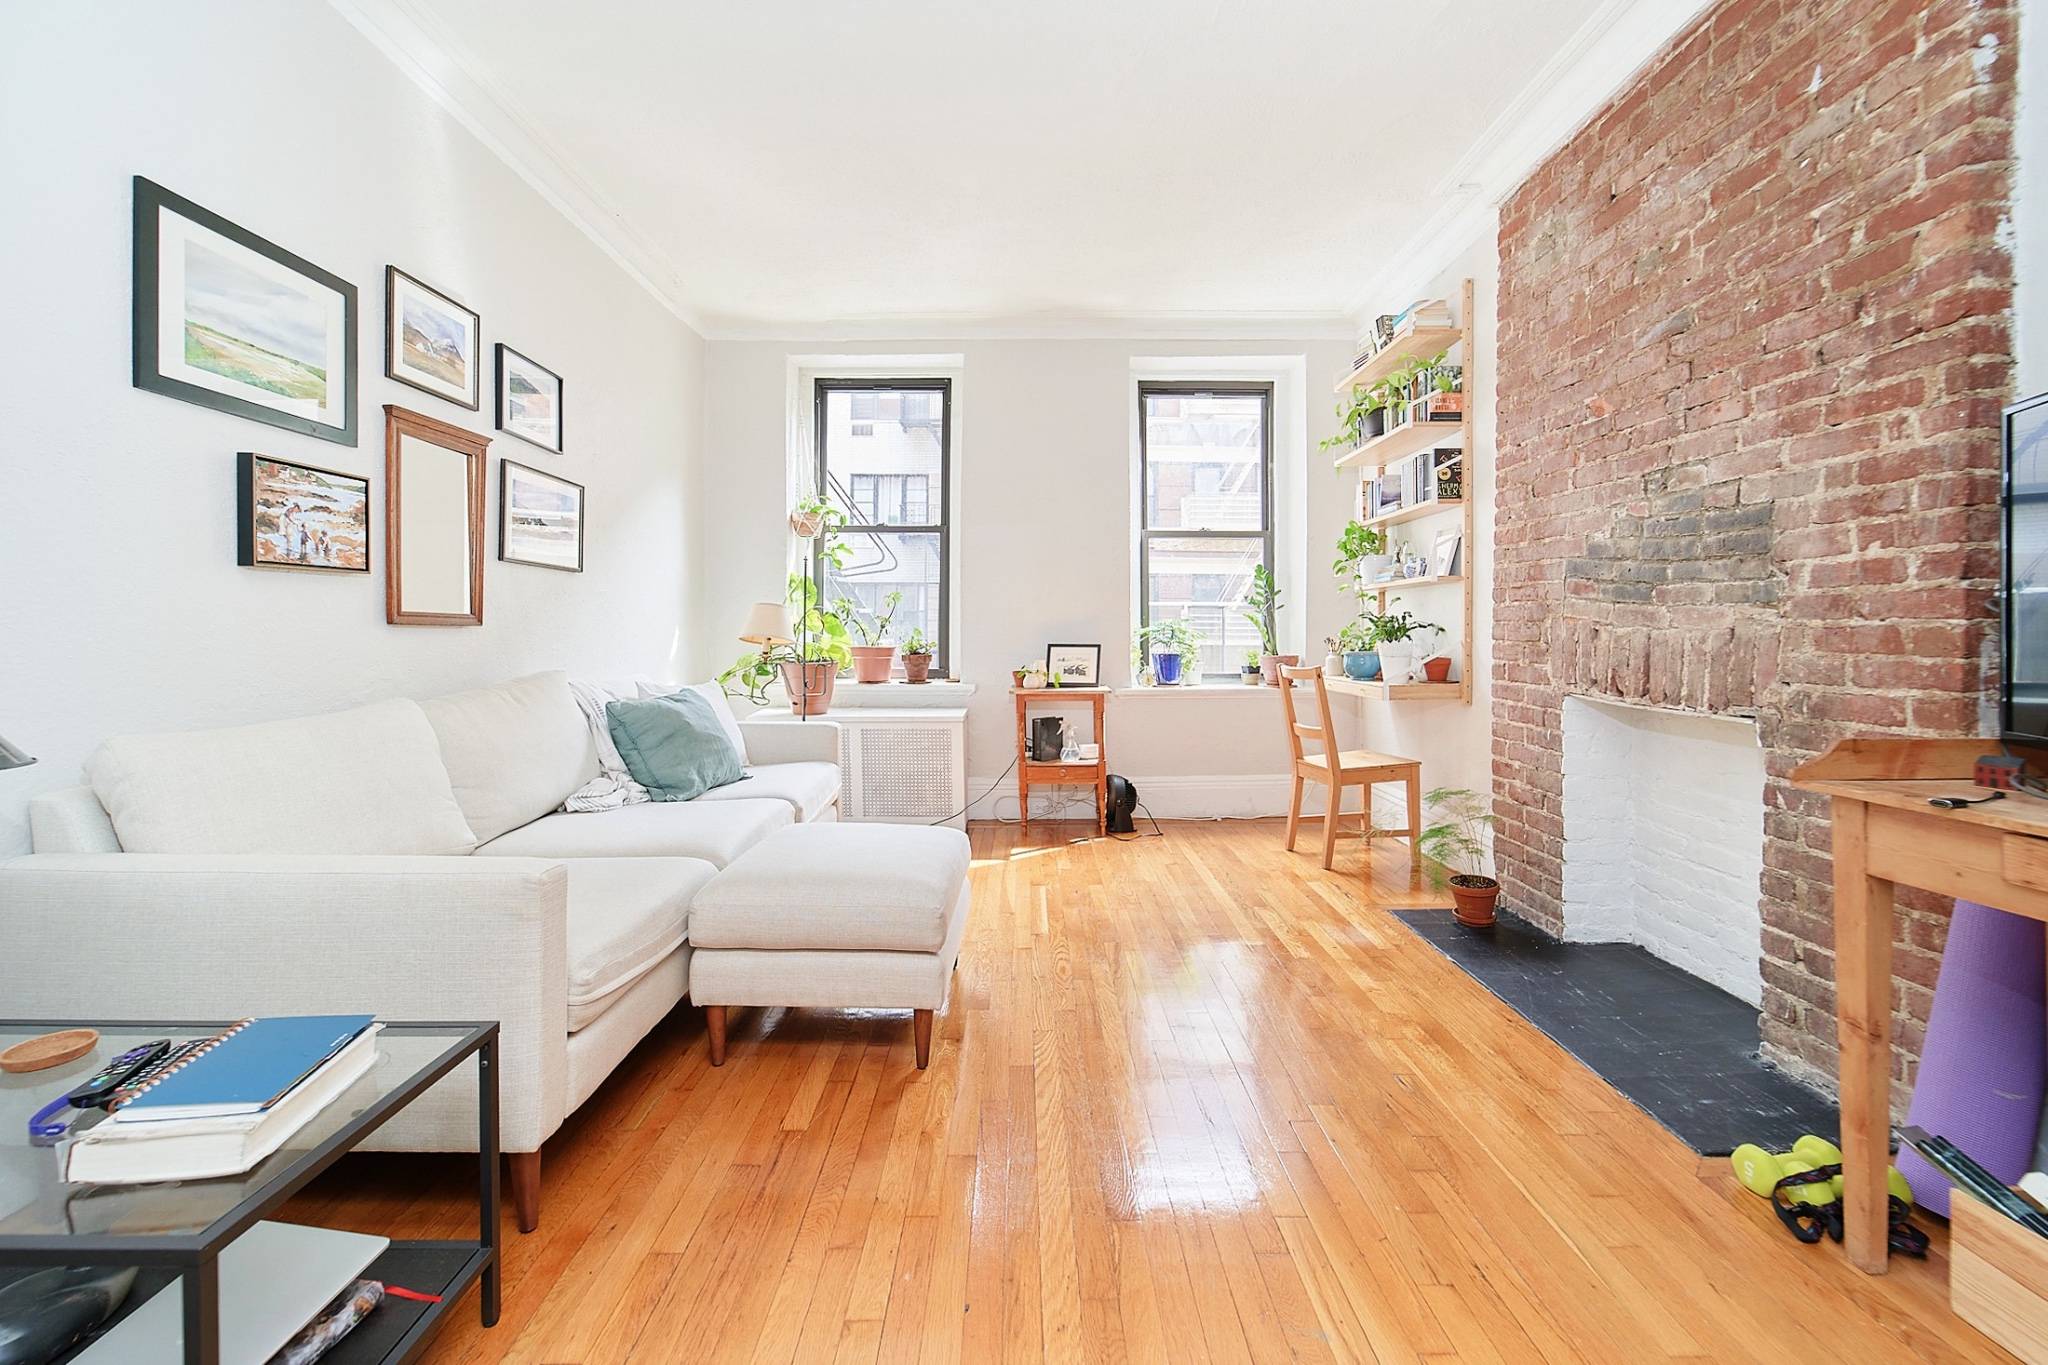 Cozy 1 bedroom apartment located on the Upper East Side available June 1st.